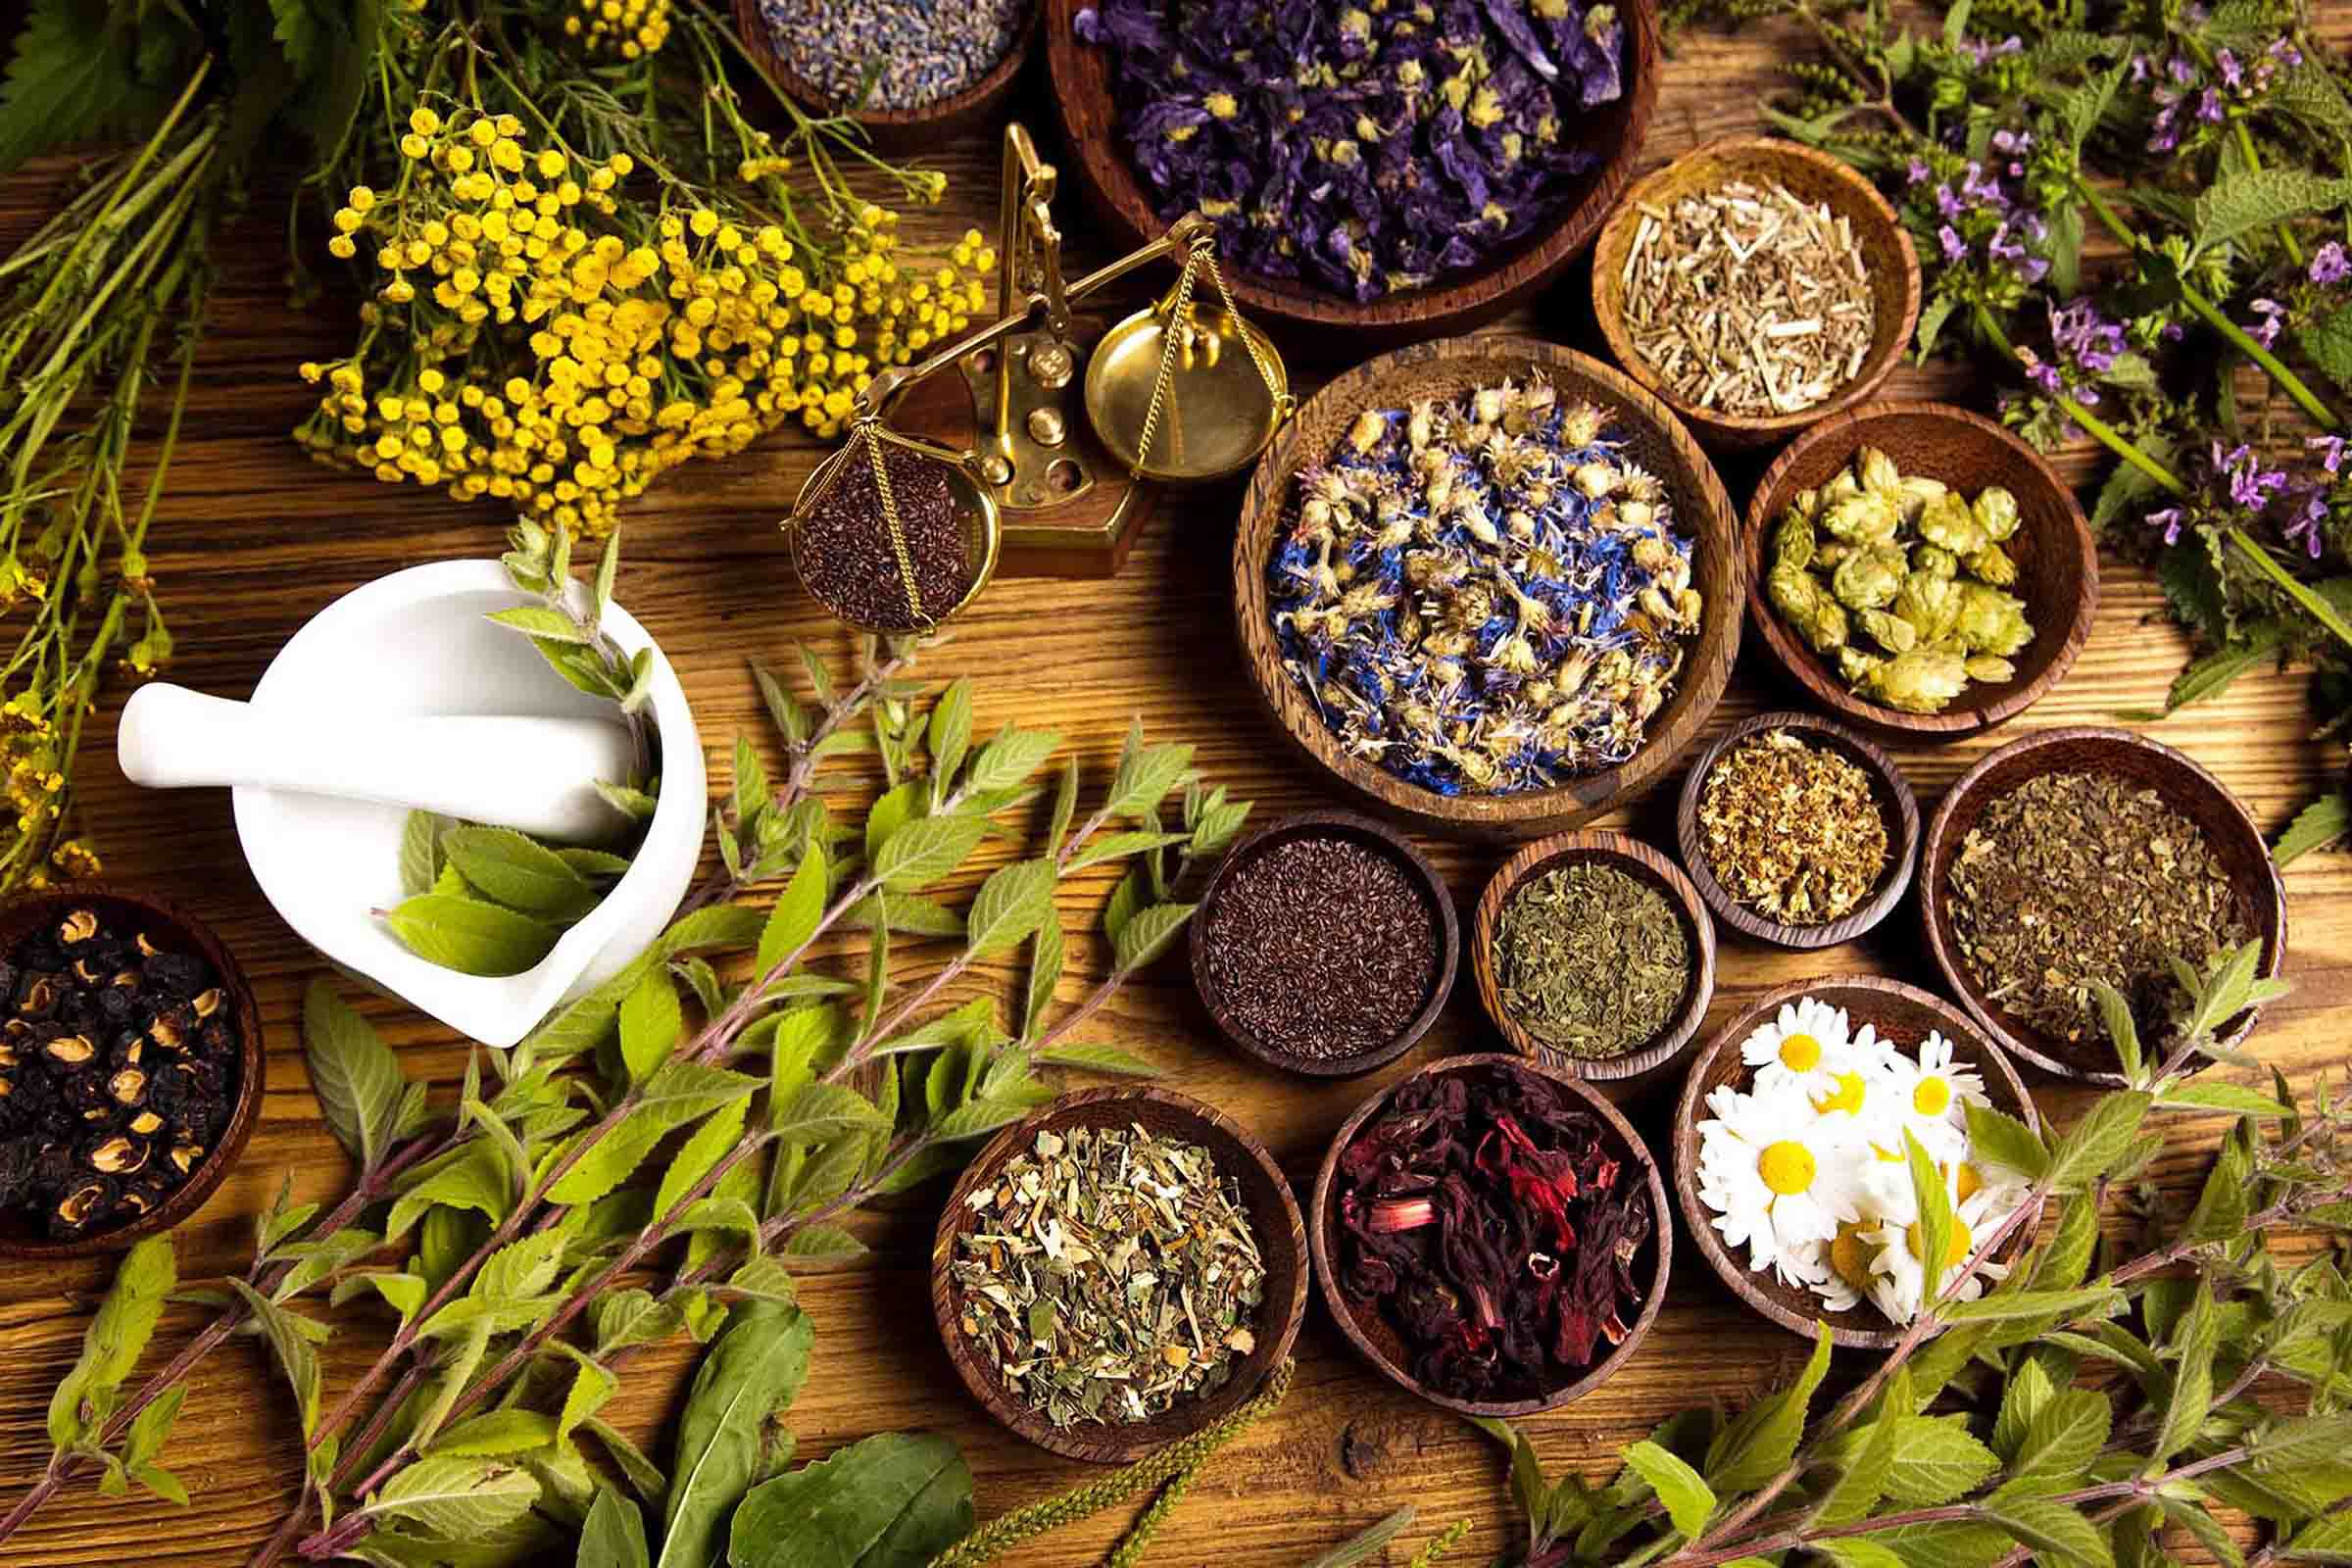 Many plants are often referred to as "herbal medicine". Dive into the details of what Dr Ryan Shelton thinks about the efficacy of herbal medicine.